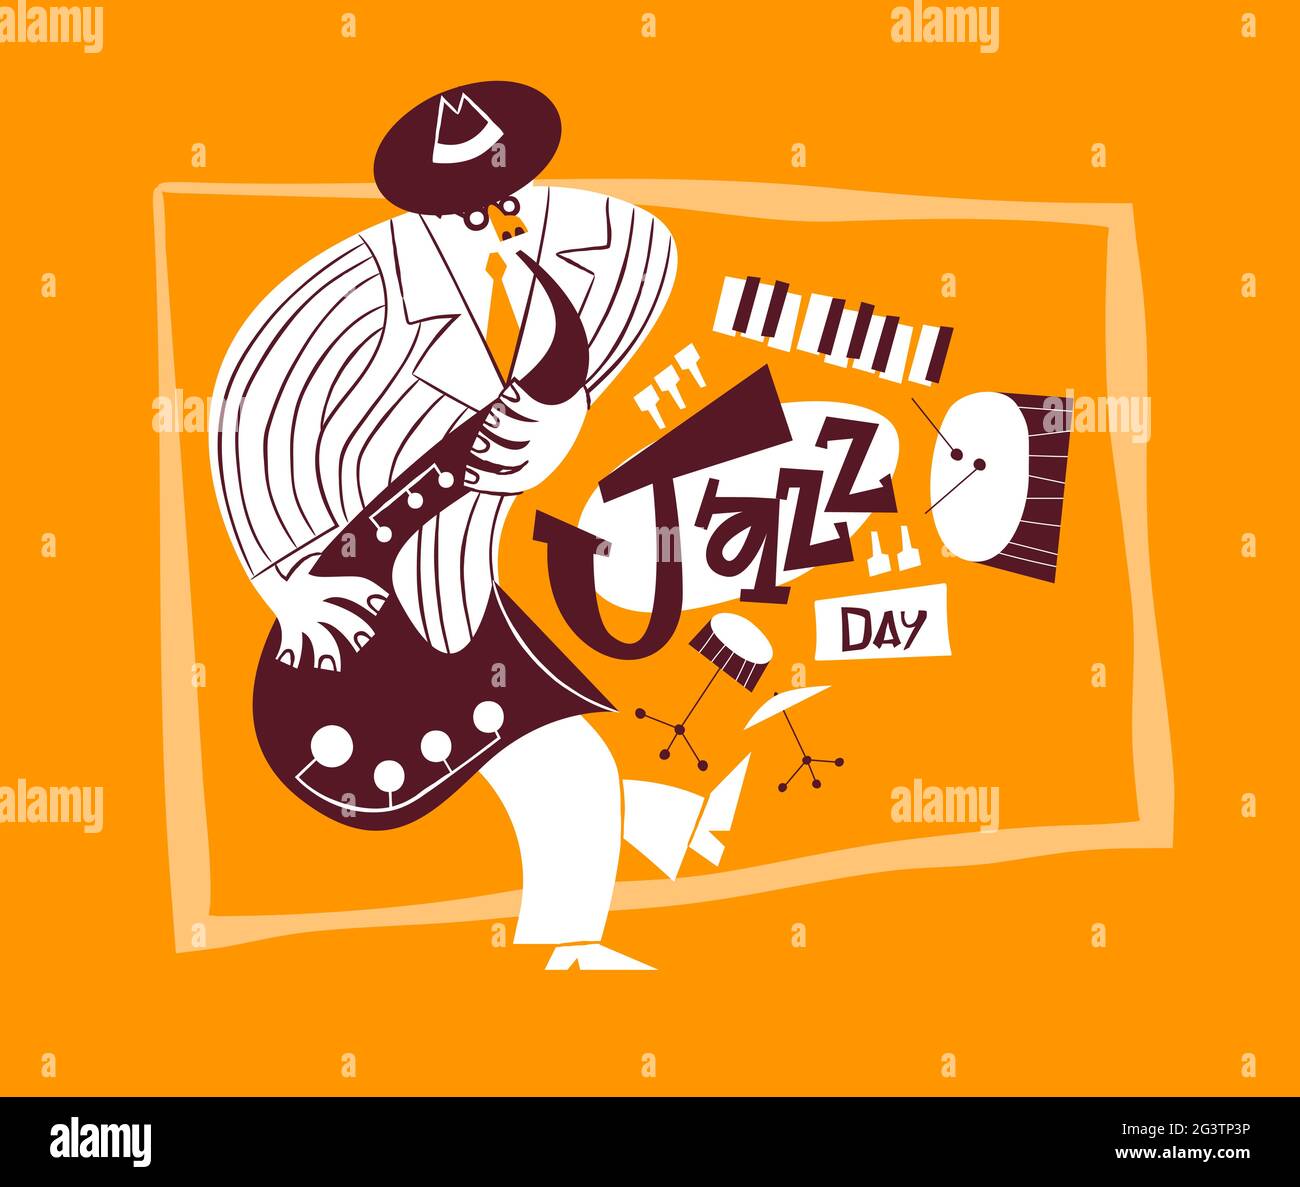 Jazz Day greeting card illustration of hand drawn cartoon man playing saxophone. Retro mid century band instruments and funny musician character for a Stock Vector